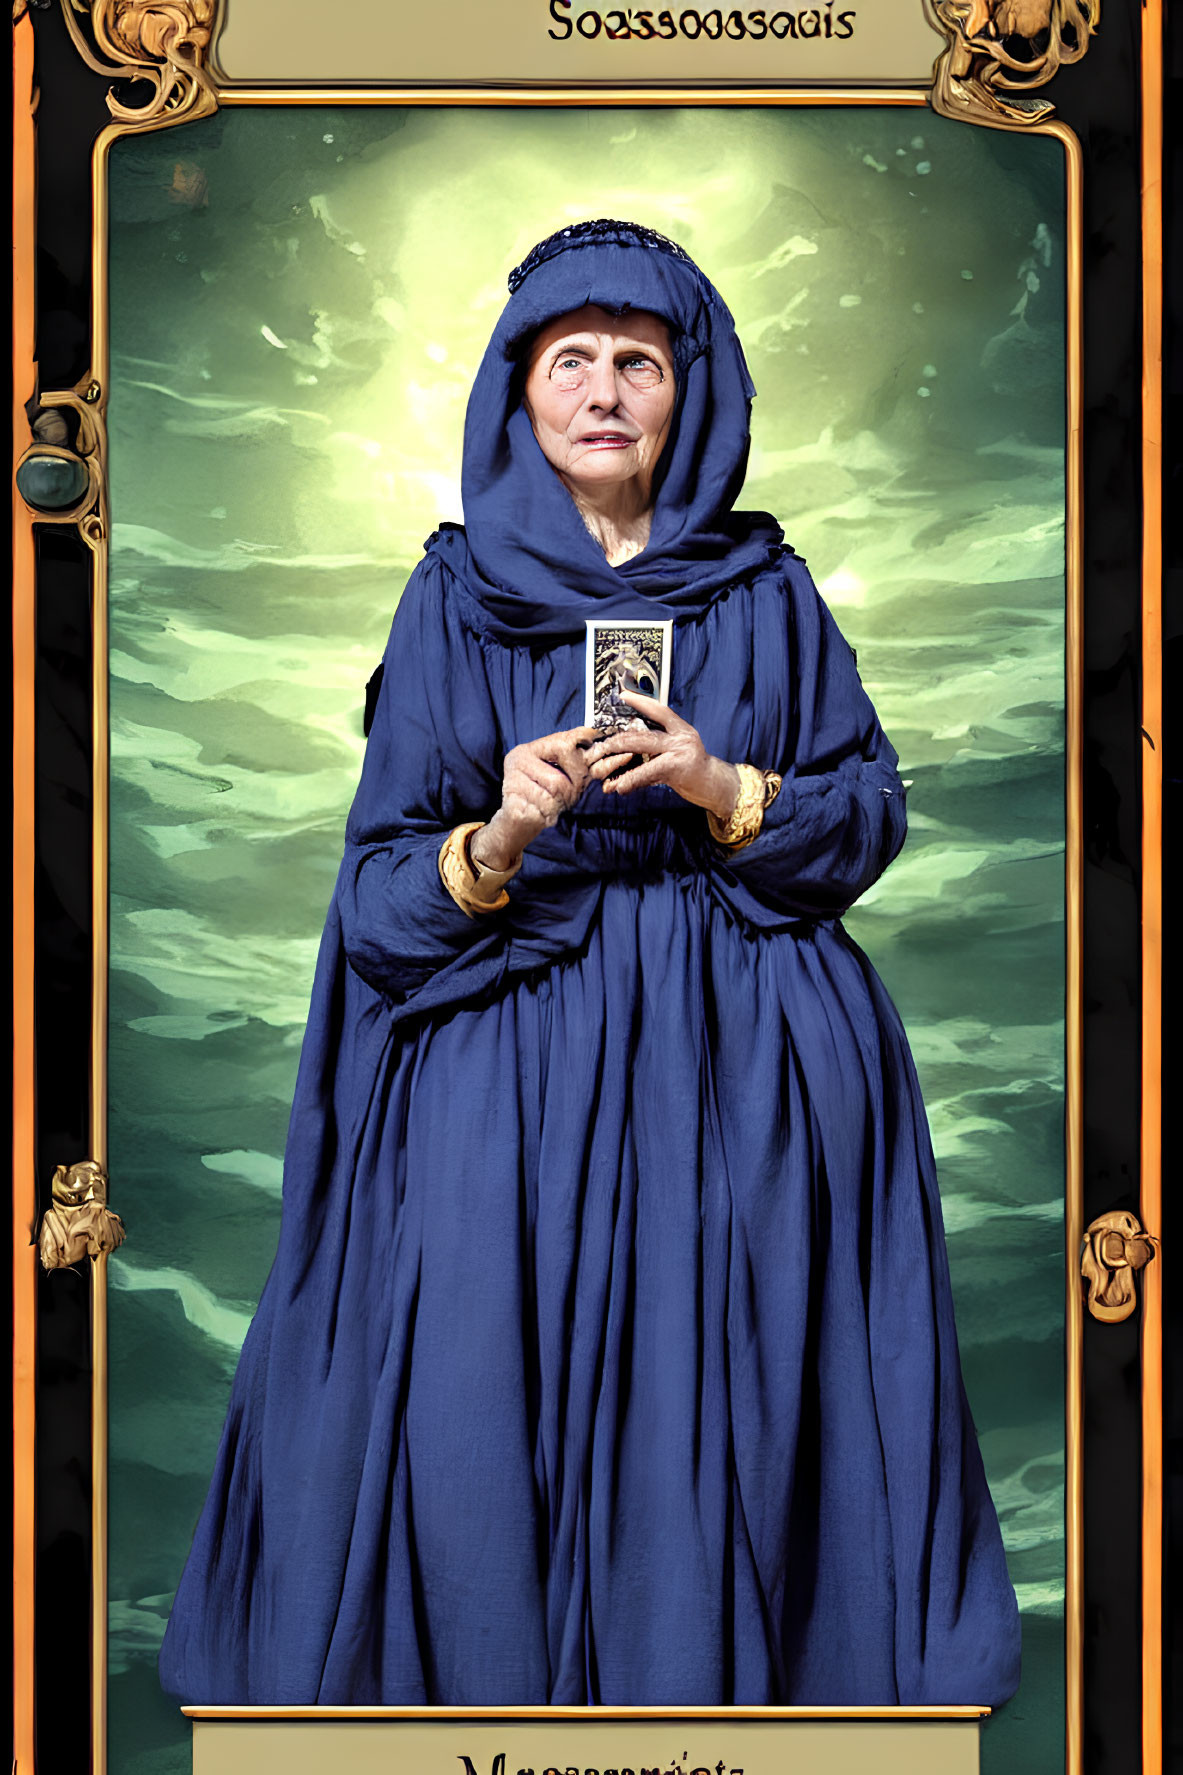 Person in Blue Robe Holding Card Against Green Cloudy Background in Decorative Frame